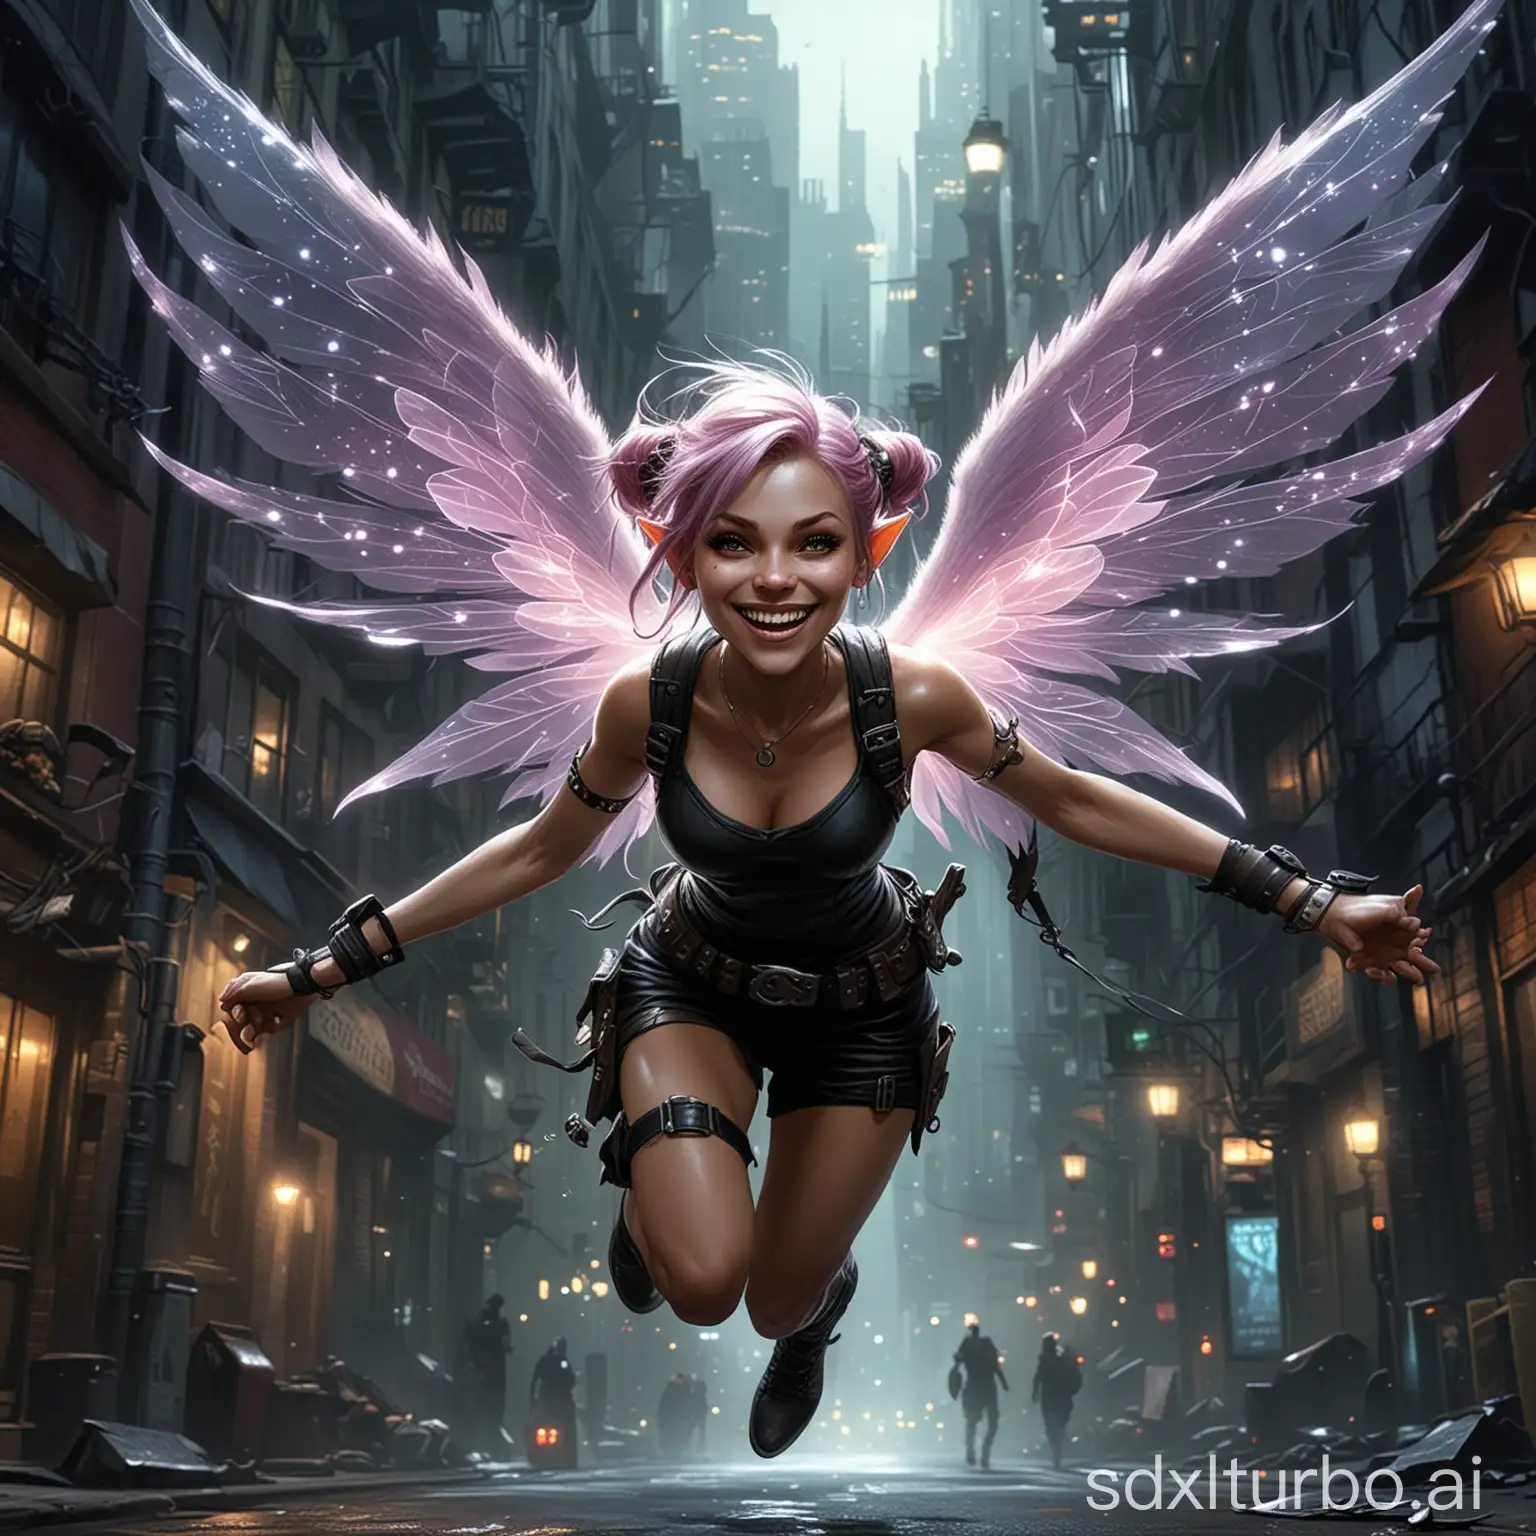 Create a high resolution, 16:9 aspect ratio, image about "A Shadowrun legend". Show a flying pixie grinning wide and with sparkling, translucent fey-wings in a dark street of modern city.